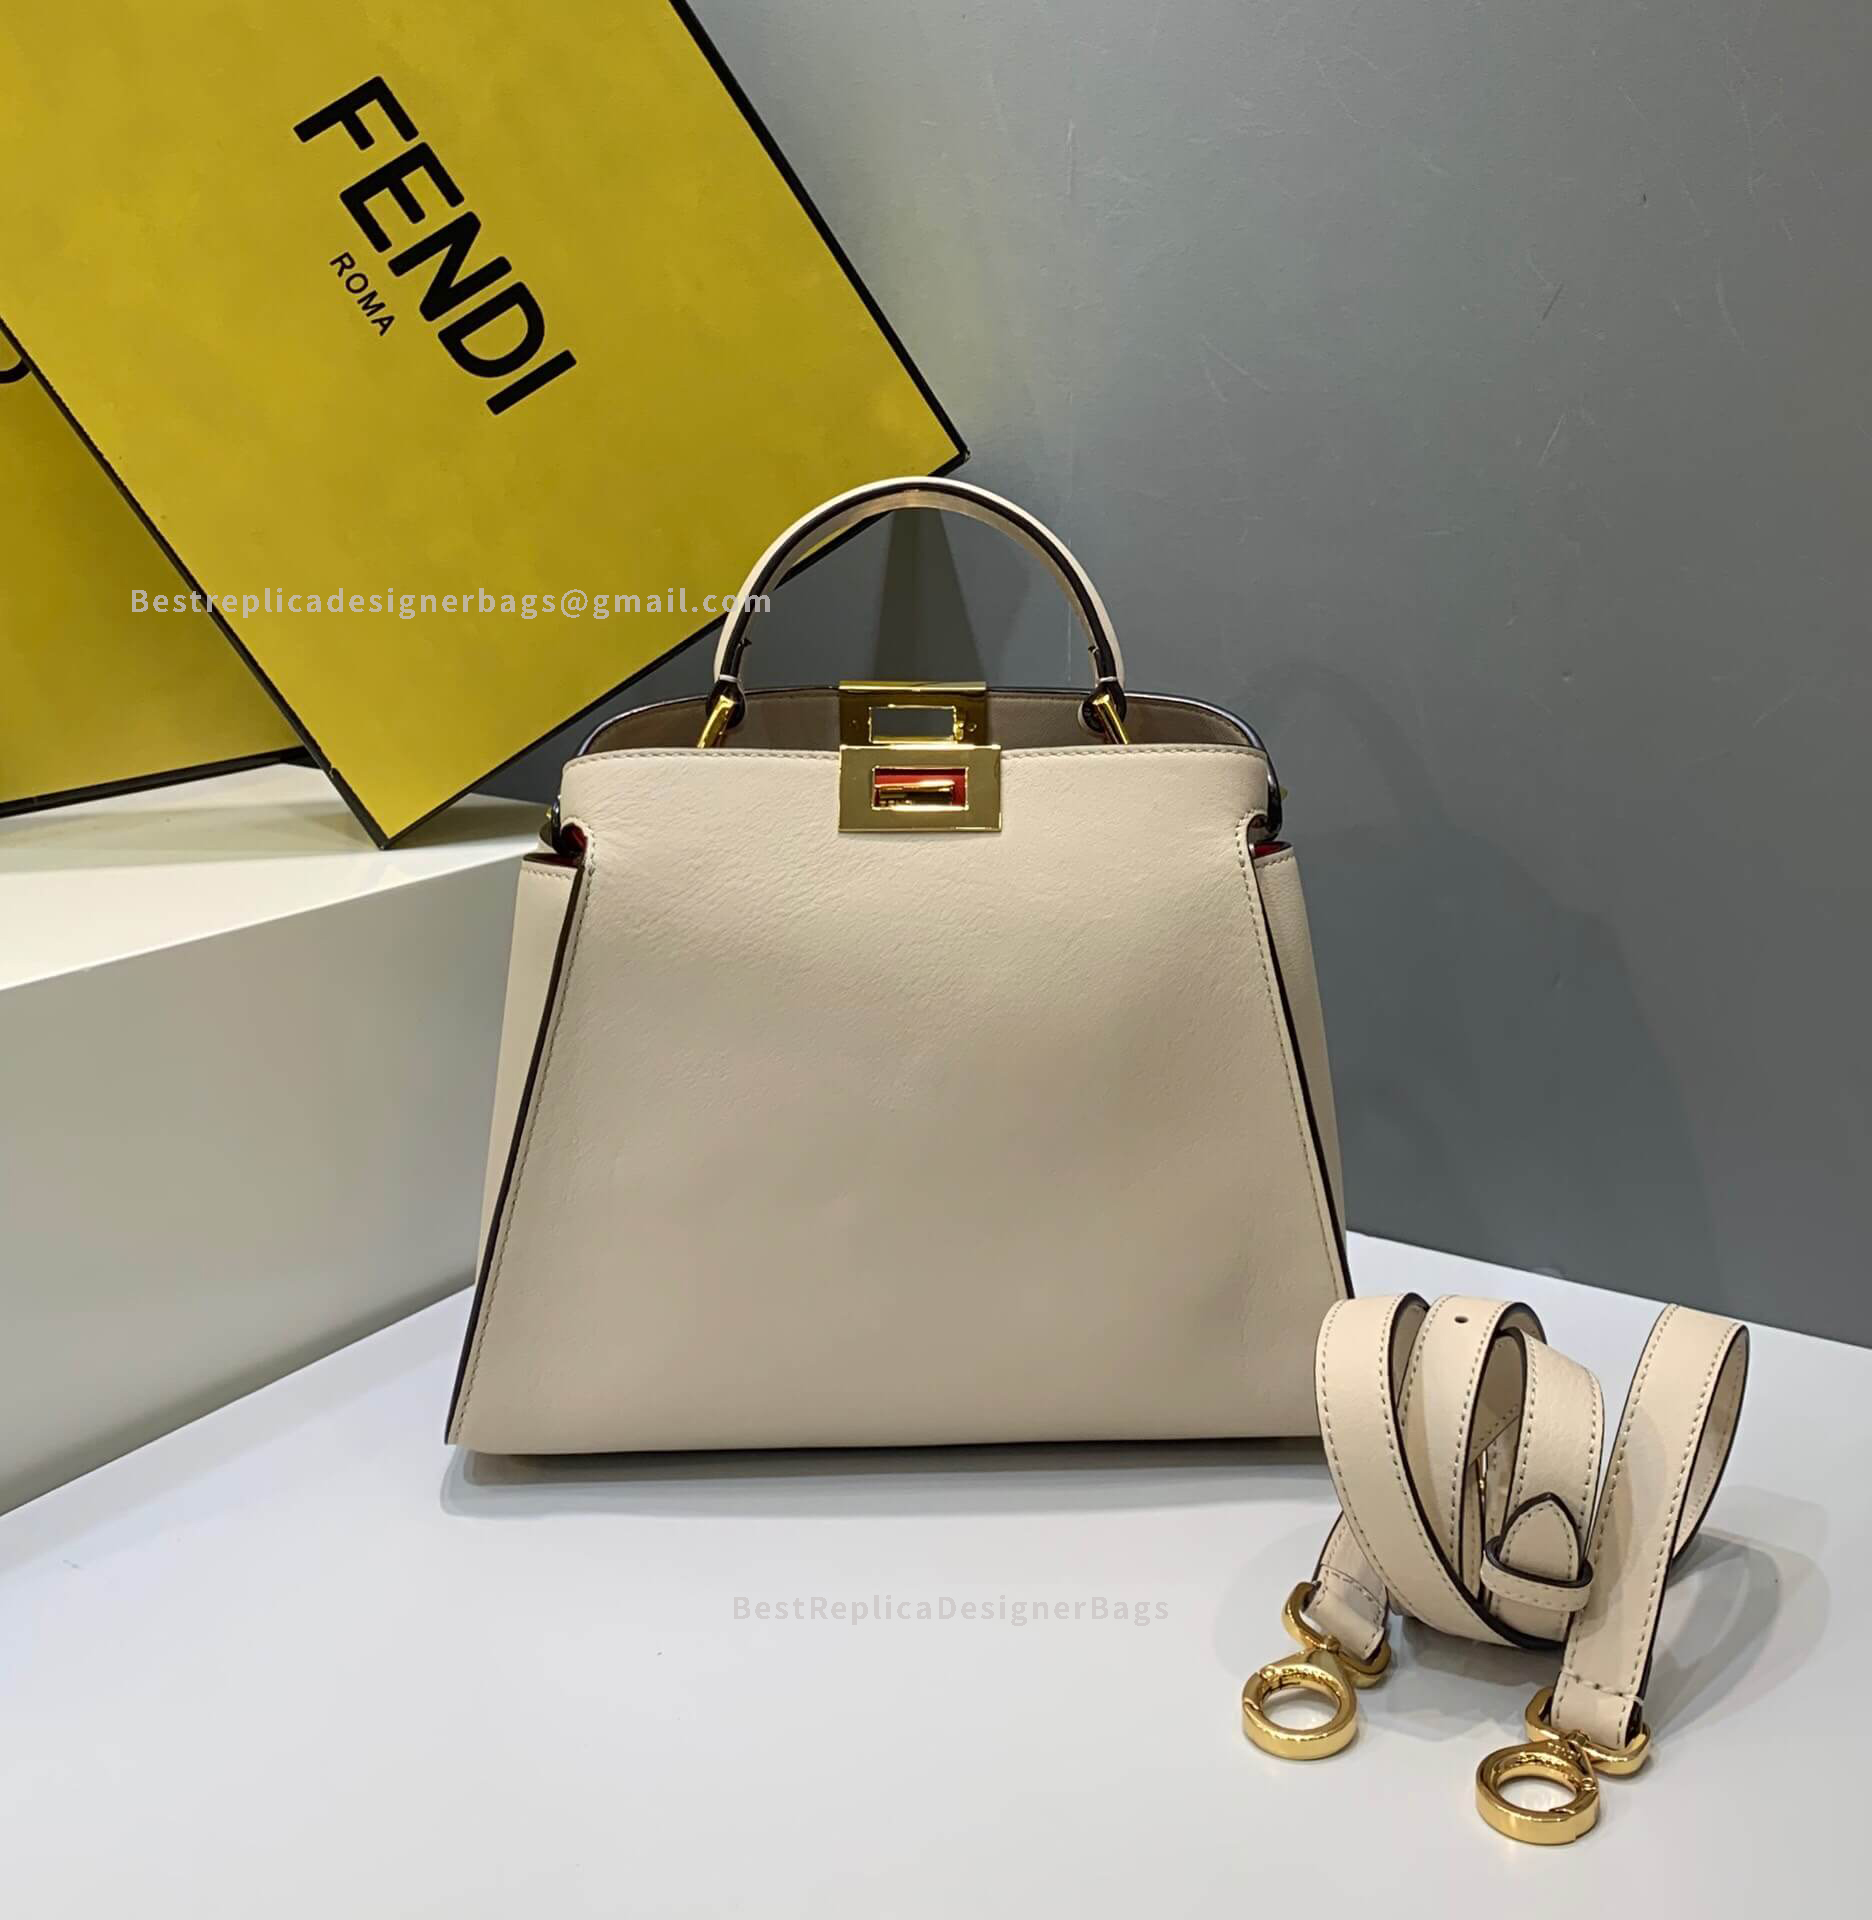 Fendi Peekaboo Iconic Essentially White And Red Leather Bag 302